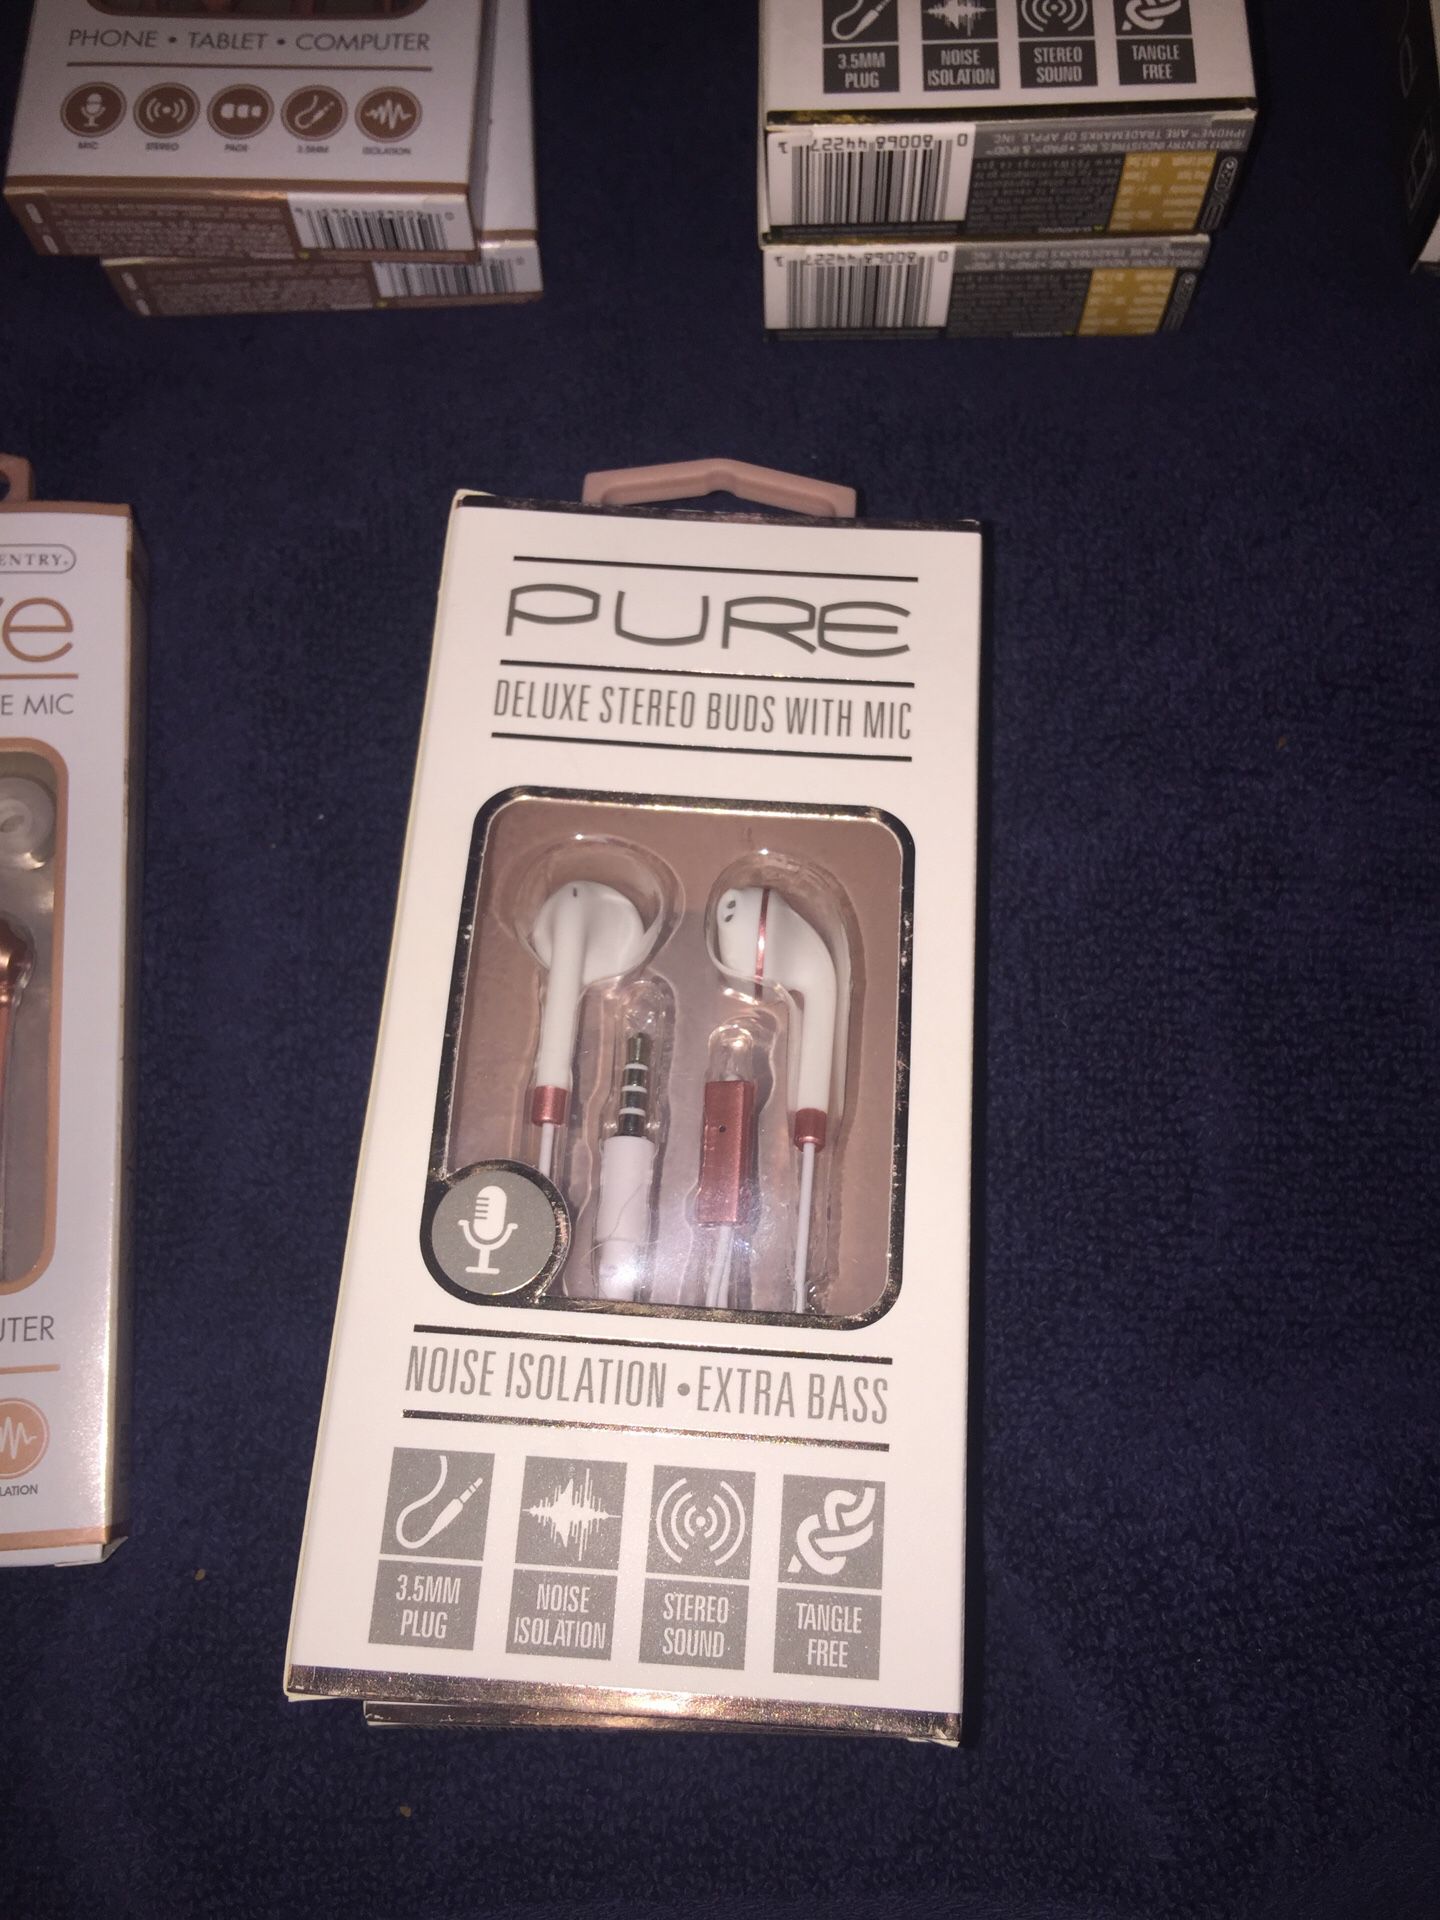 Brand new never used pure Deluxe stereo buds with Mic Evolve stereo earbuds in line M/C $ 8.00